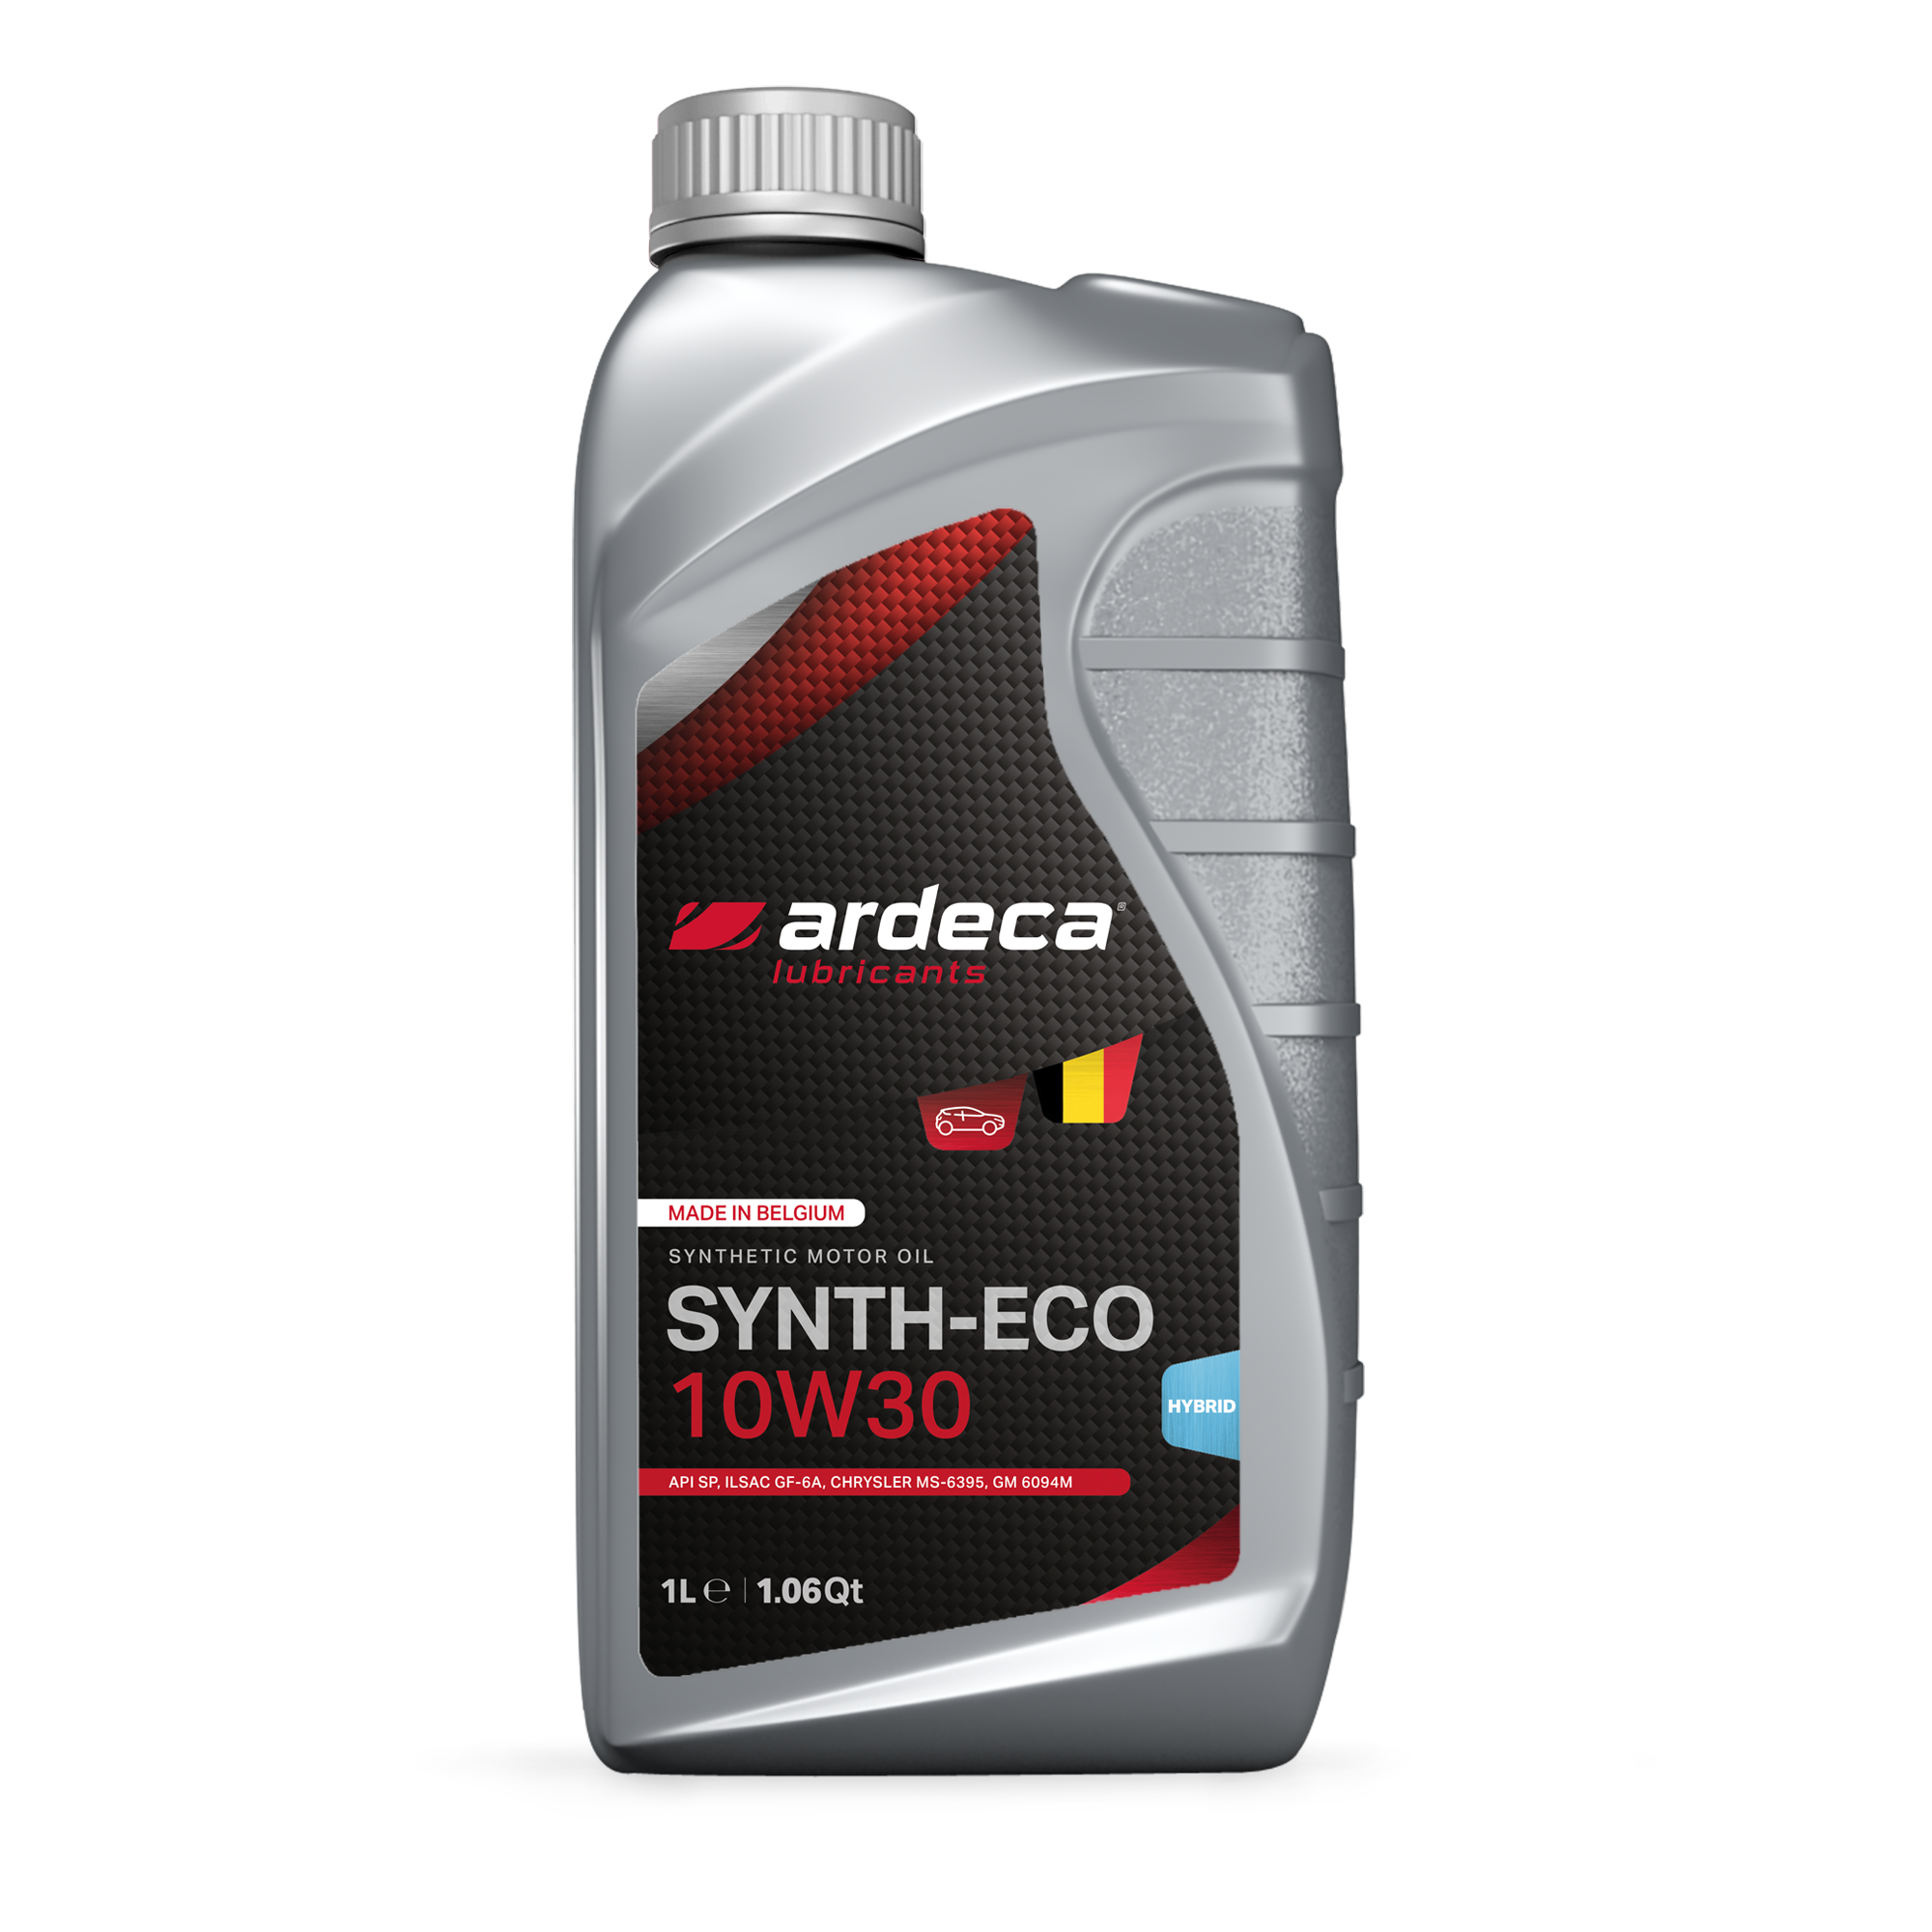 SYNTH-ECO 10W30